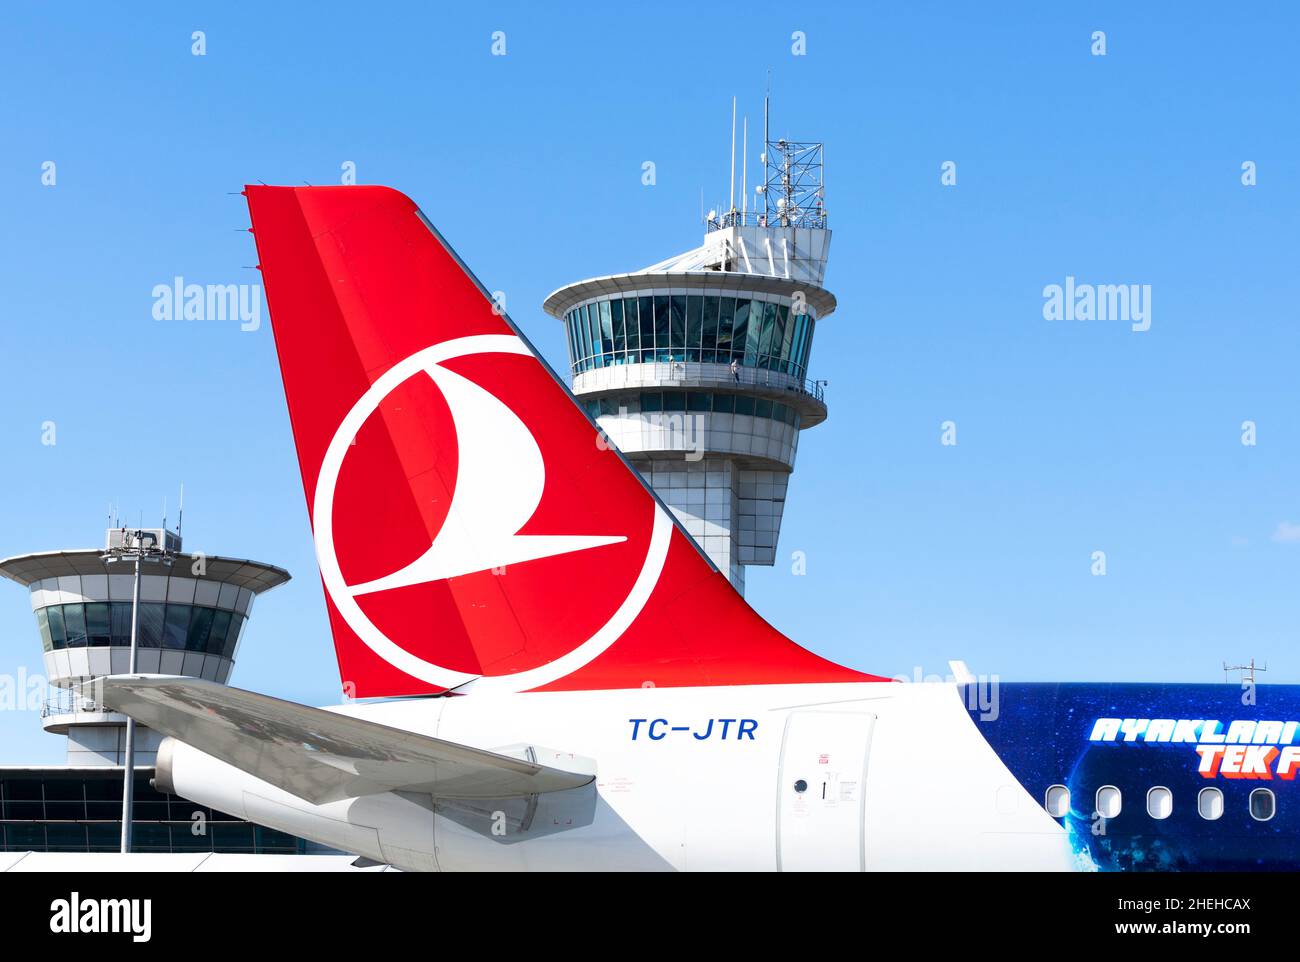 Turkish Airlines logo on the tails of a Airbus A321 Aircraft with air traffic control tower in the background. Stock Photo